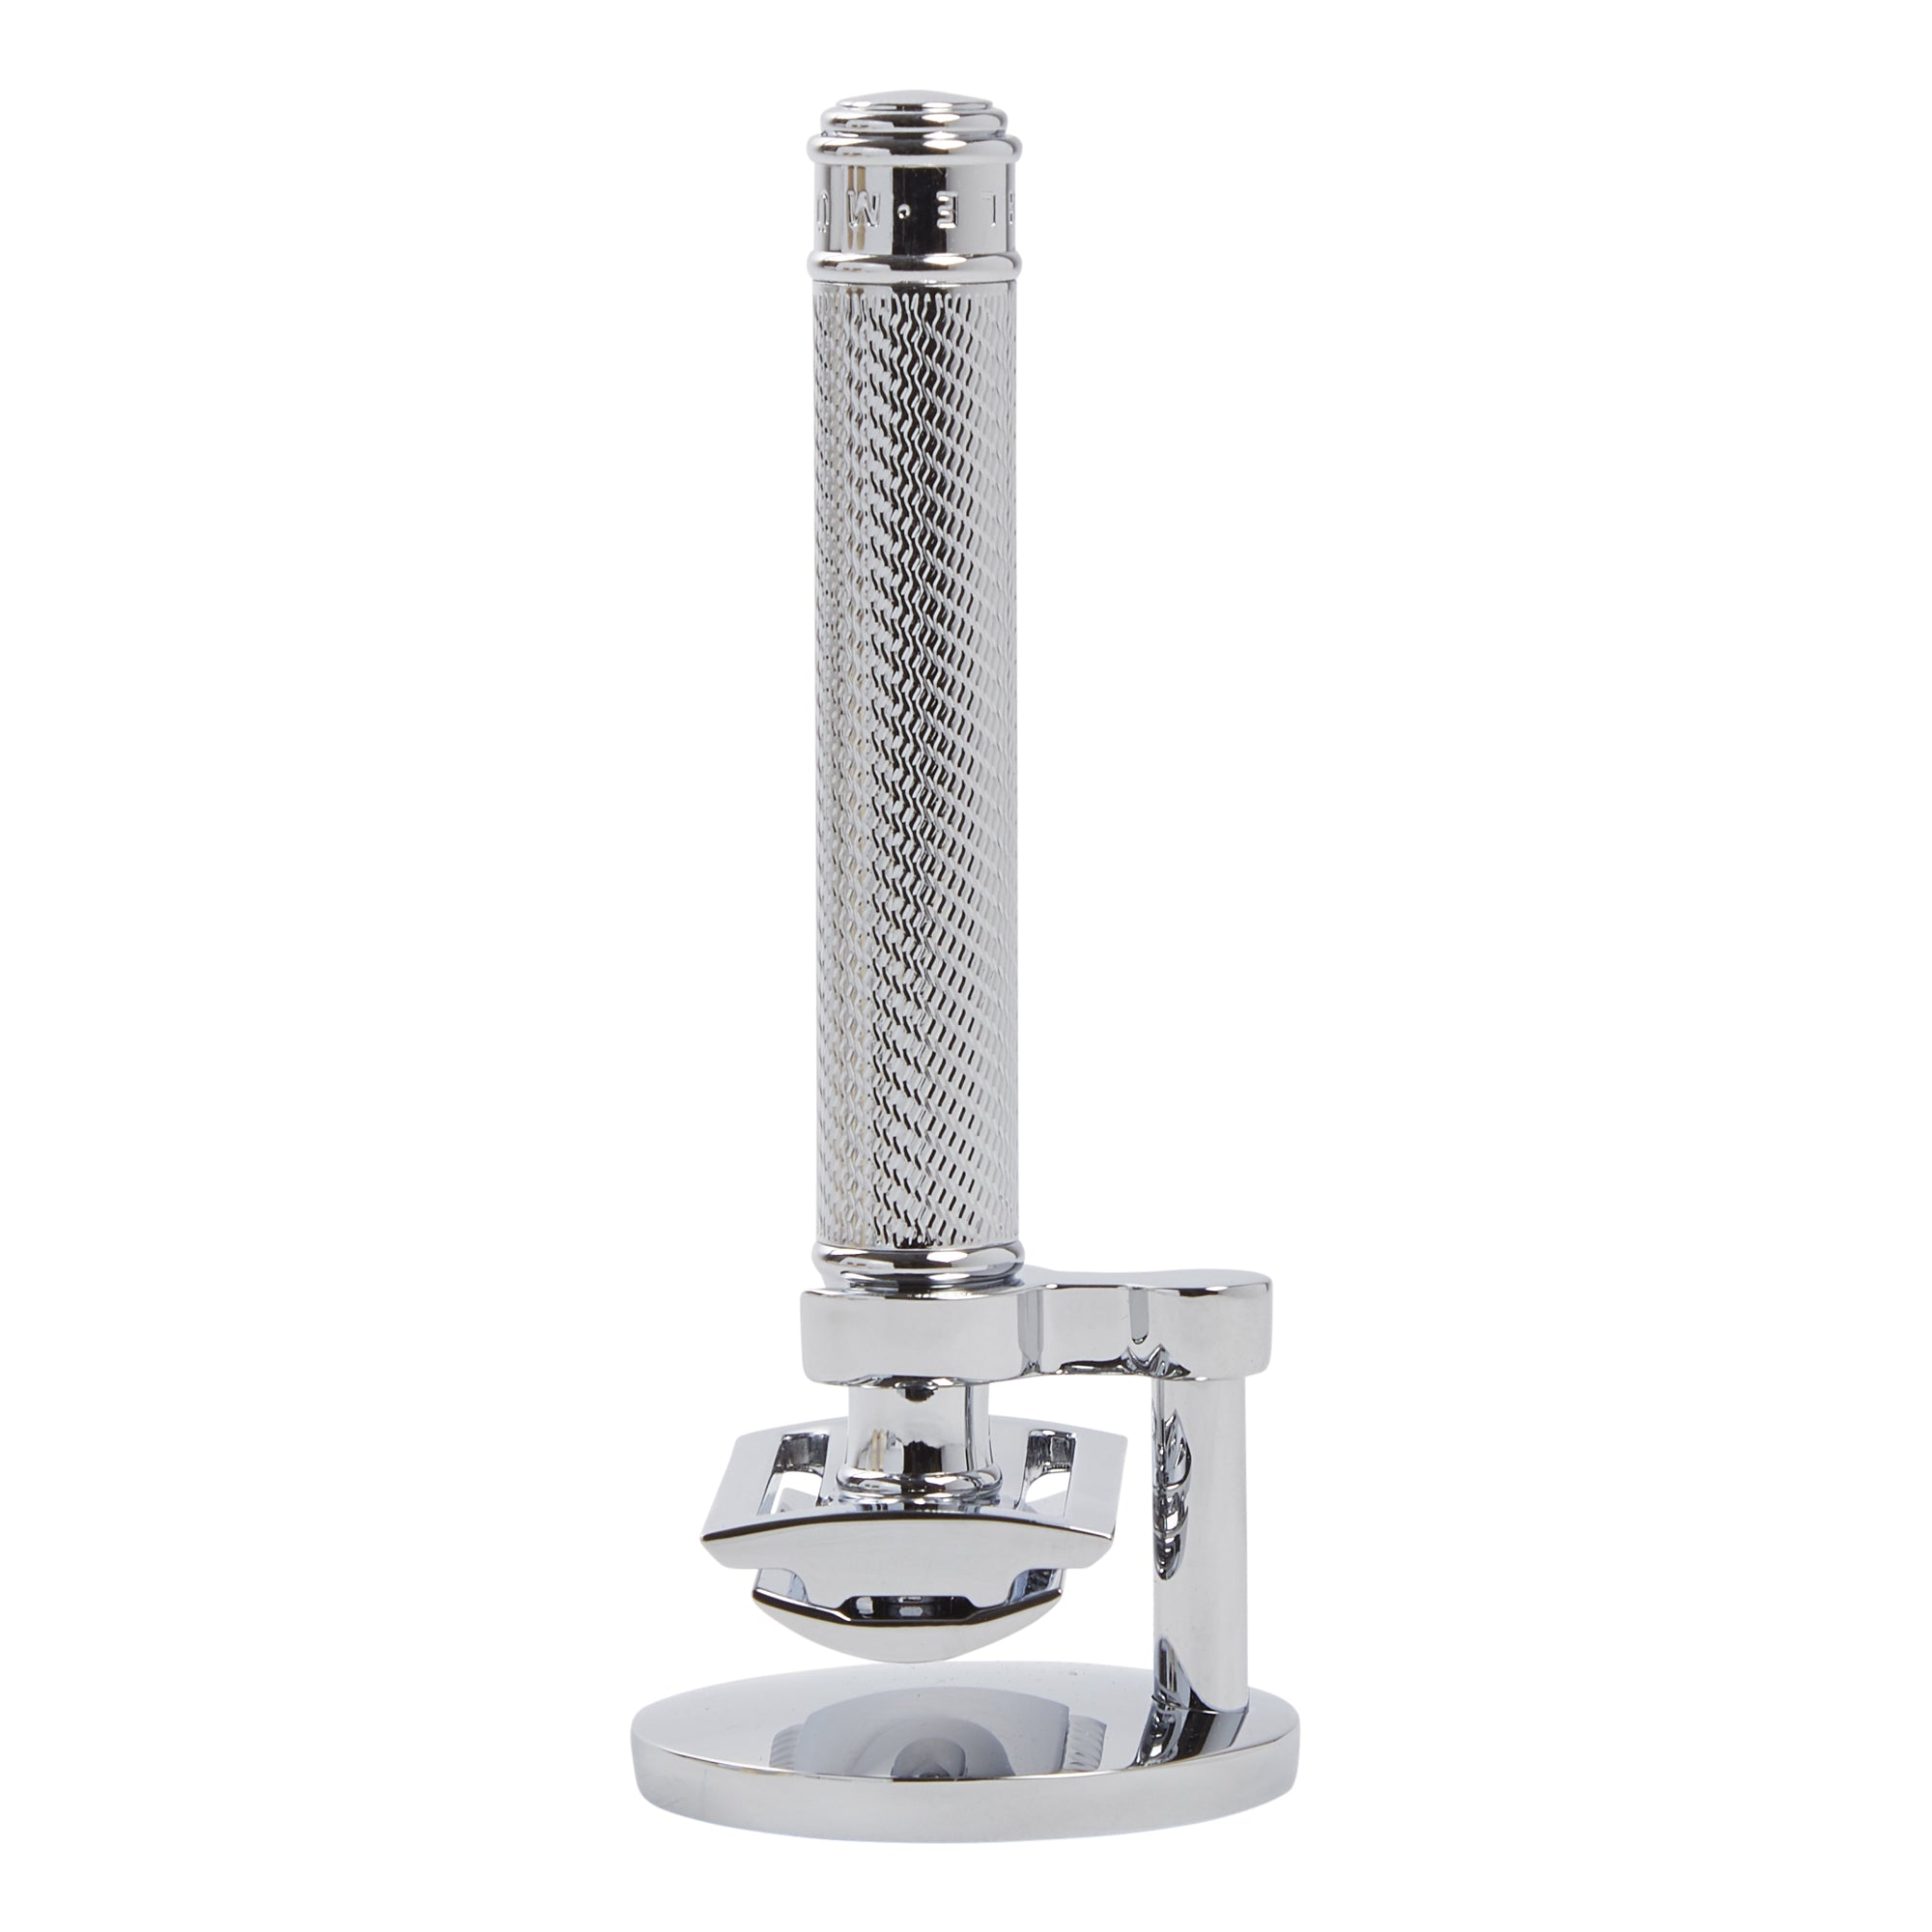 An elegant chrome Muhle Safety Razor Stand from KirbyAllison.com on a white background.